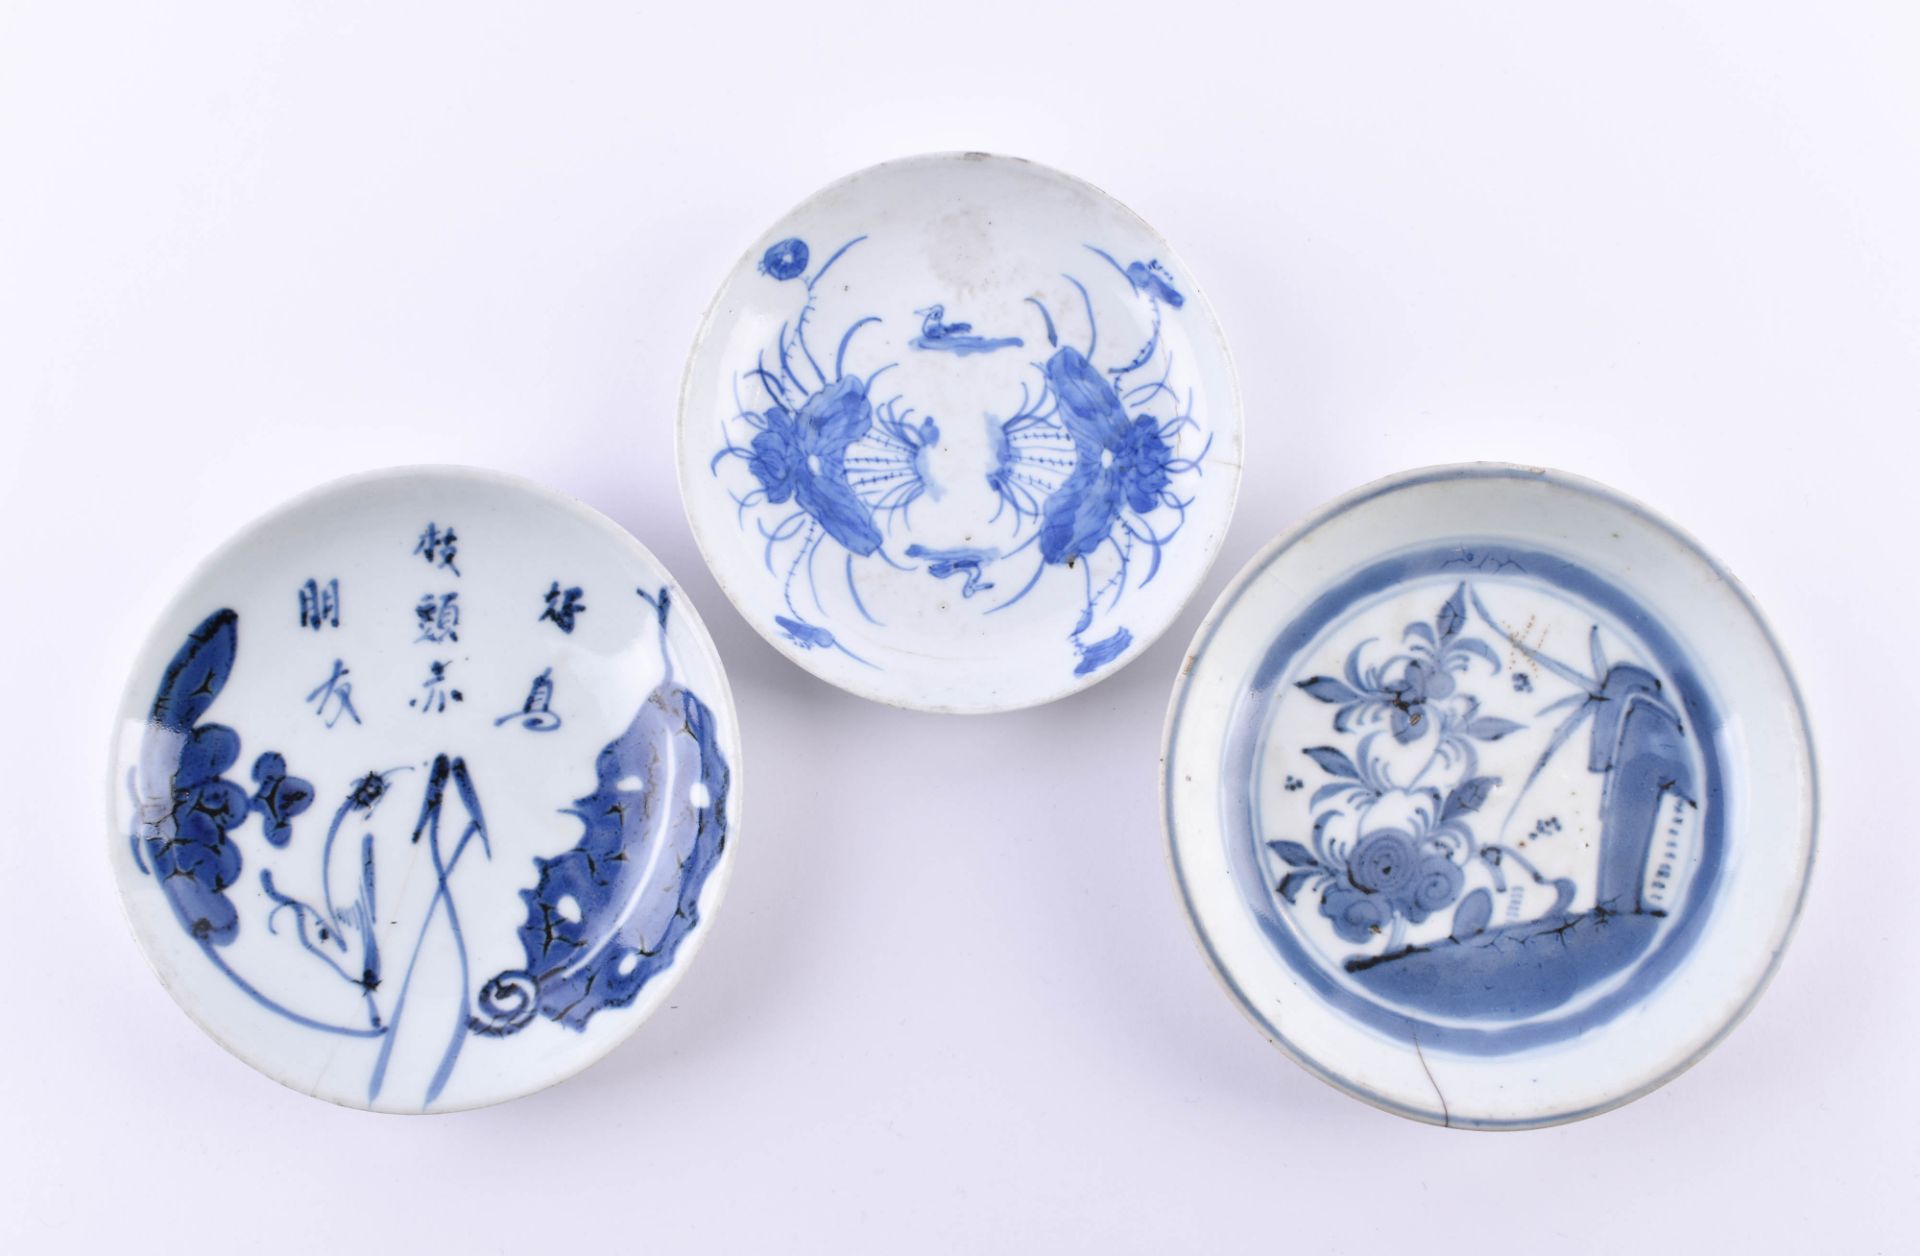  A group of Asian porcelain China Qing dynasty